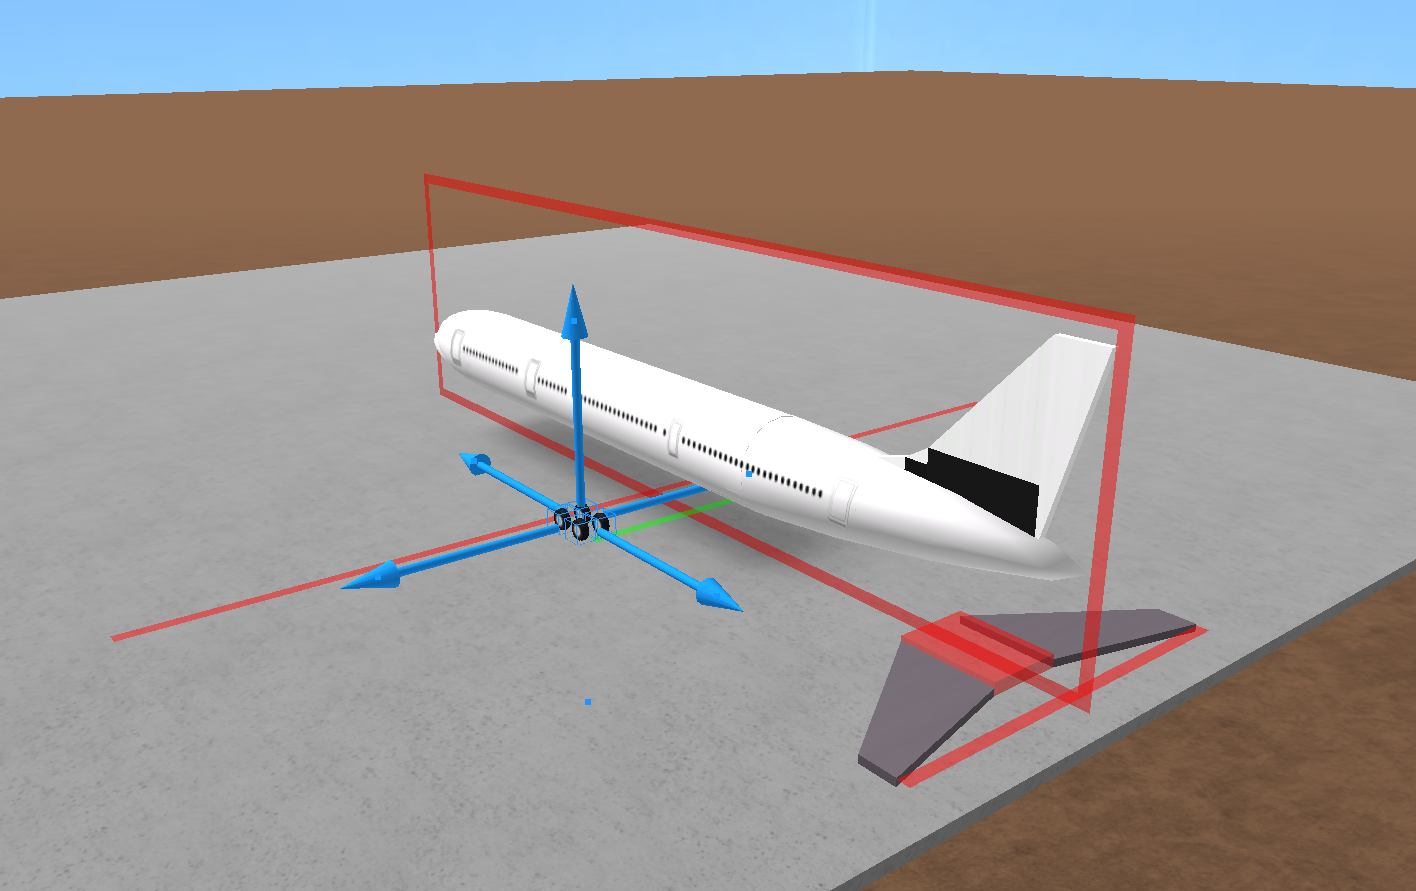 How To Make A Plane In Roblox Studio